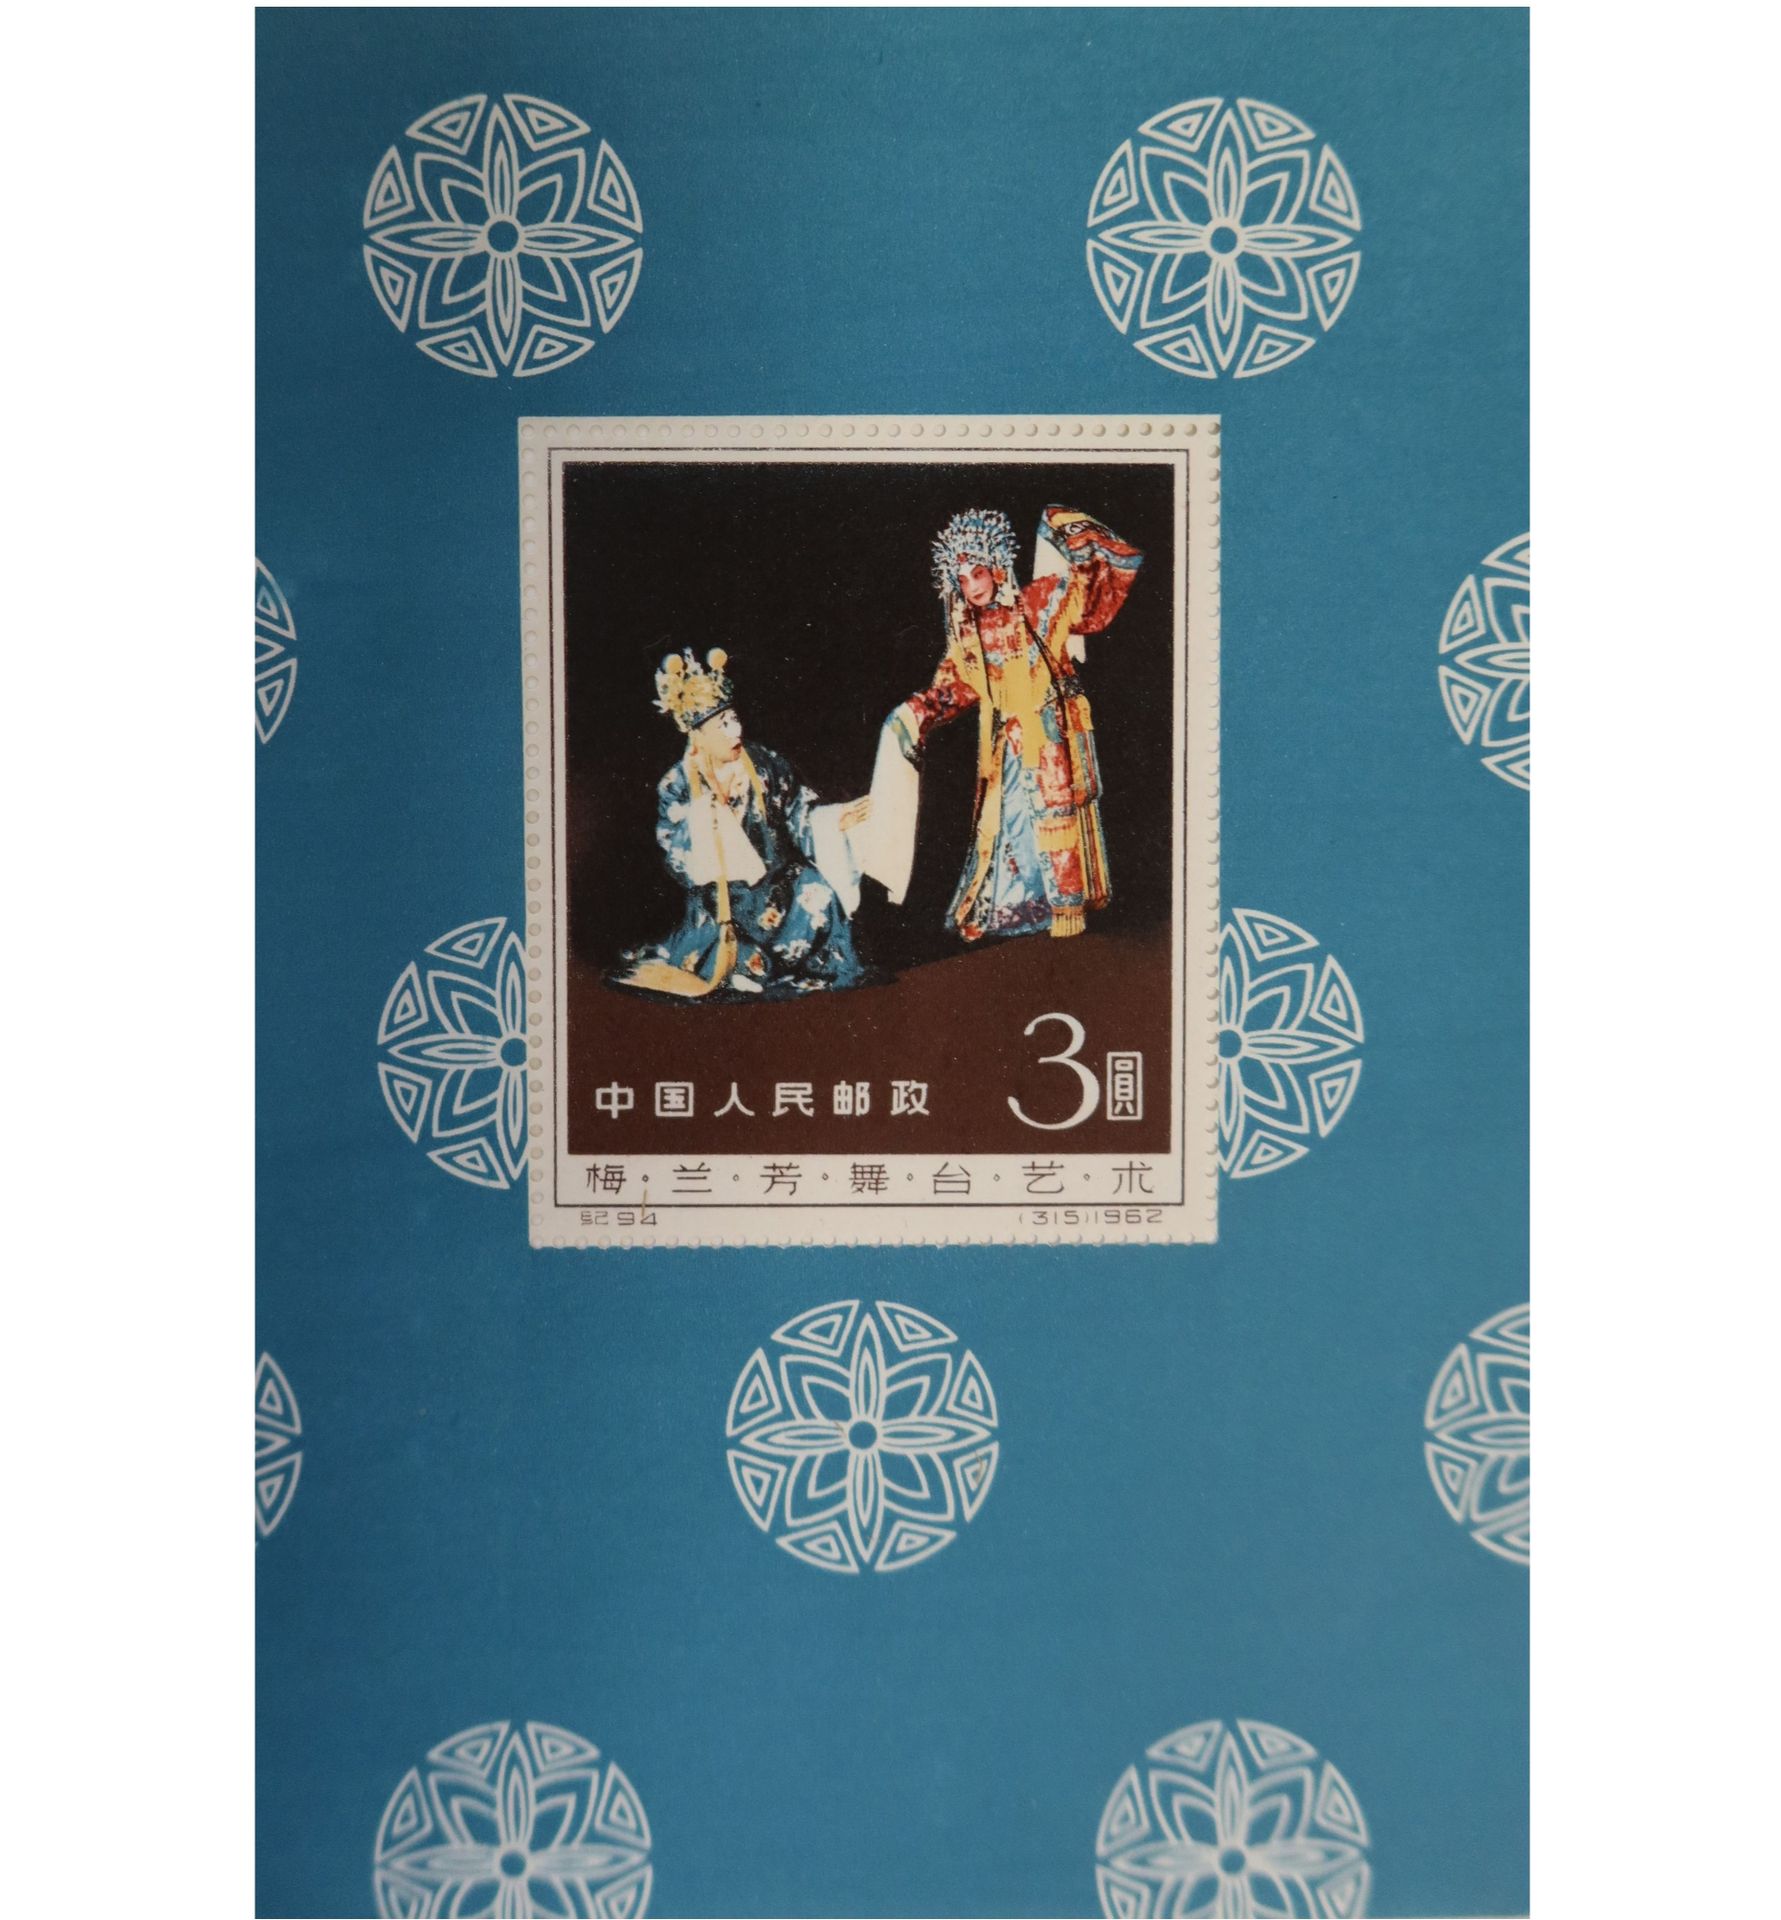 Null [CHINA]
China
Rare block n°11 "Theater, in memory of the actor Mei Lan-Fang&hellip;